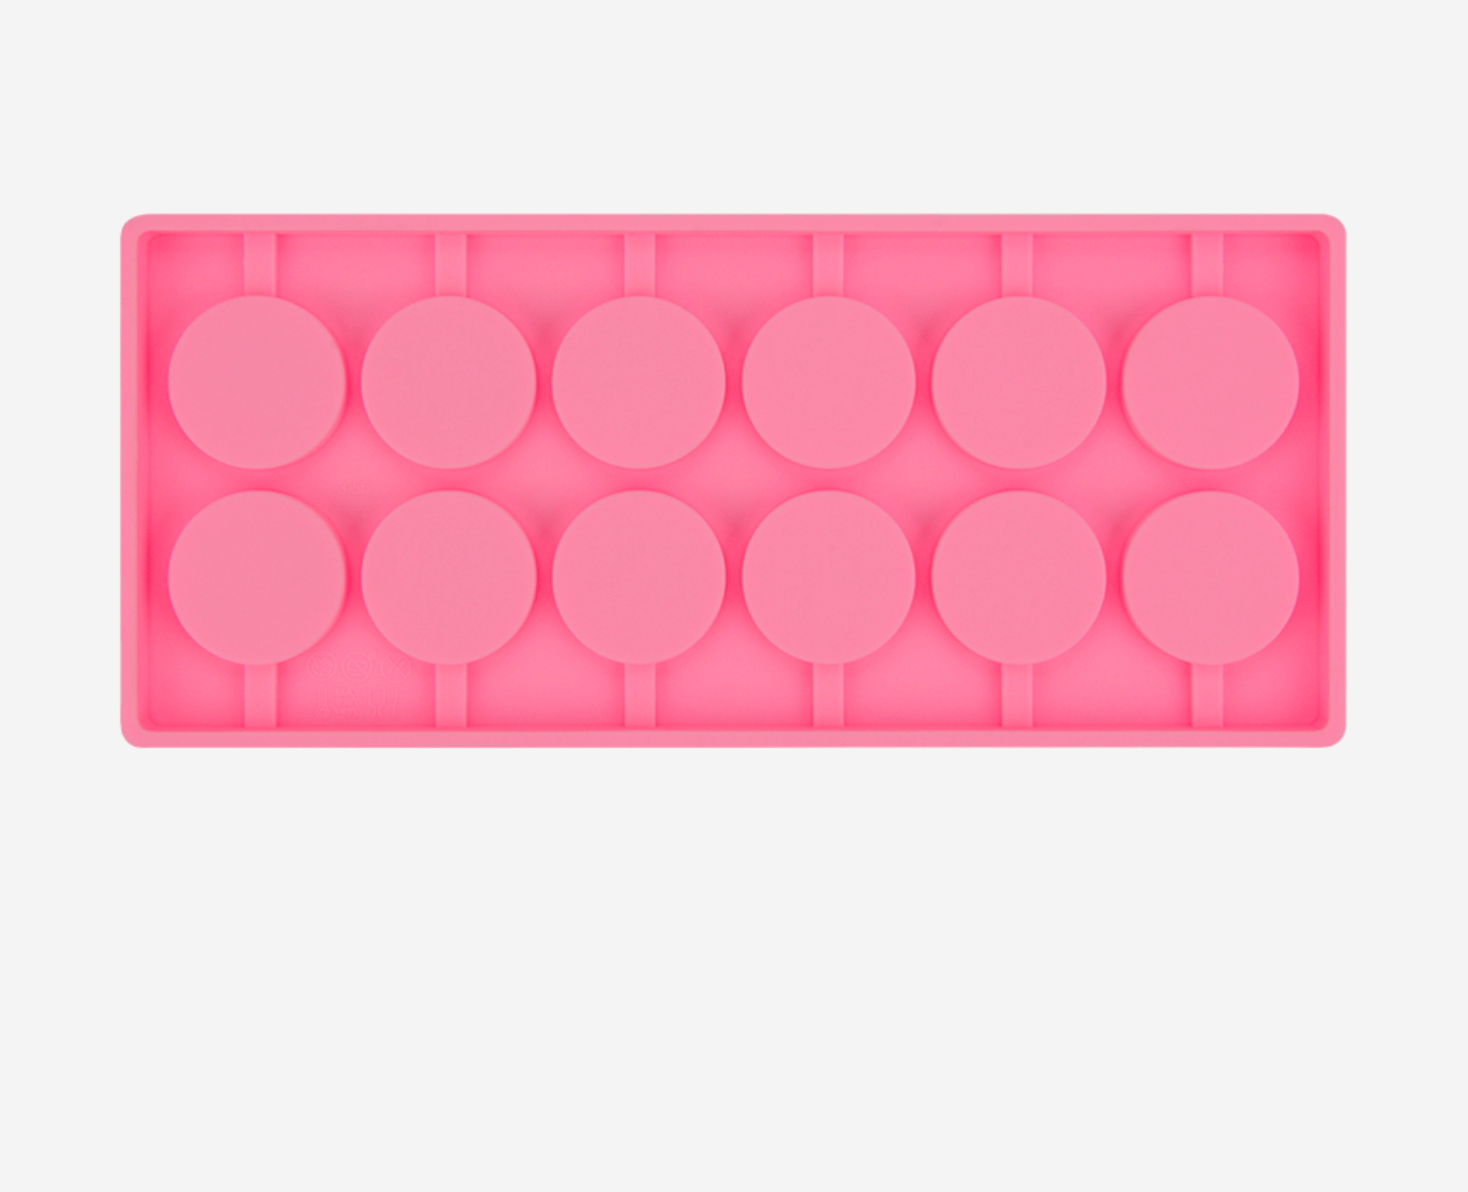 Oval Candy Silicone Mold - 16 Cavity 2.1 x 1.2 (5.5cm x 3.1cm) each -  BSUPP028